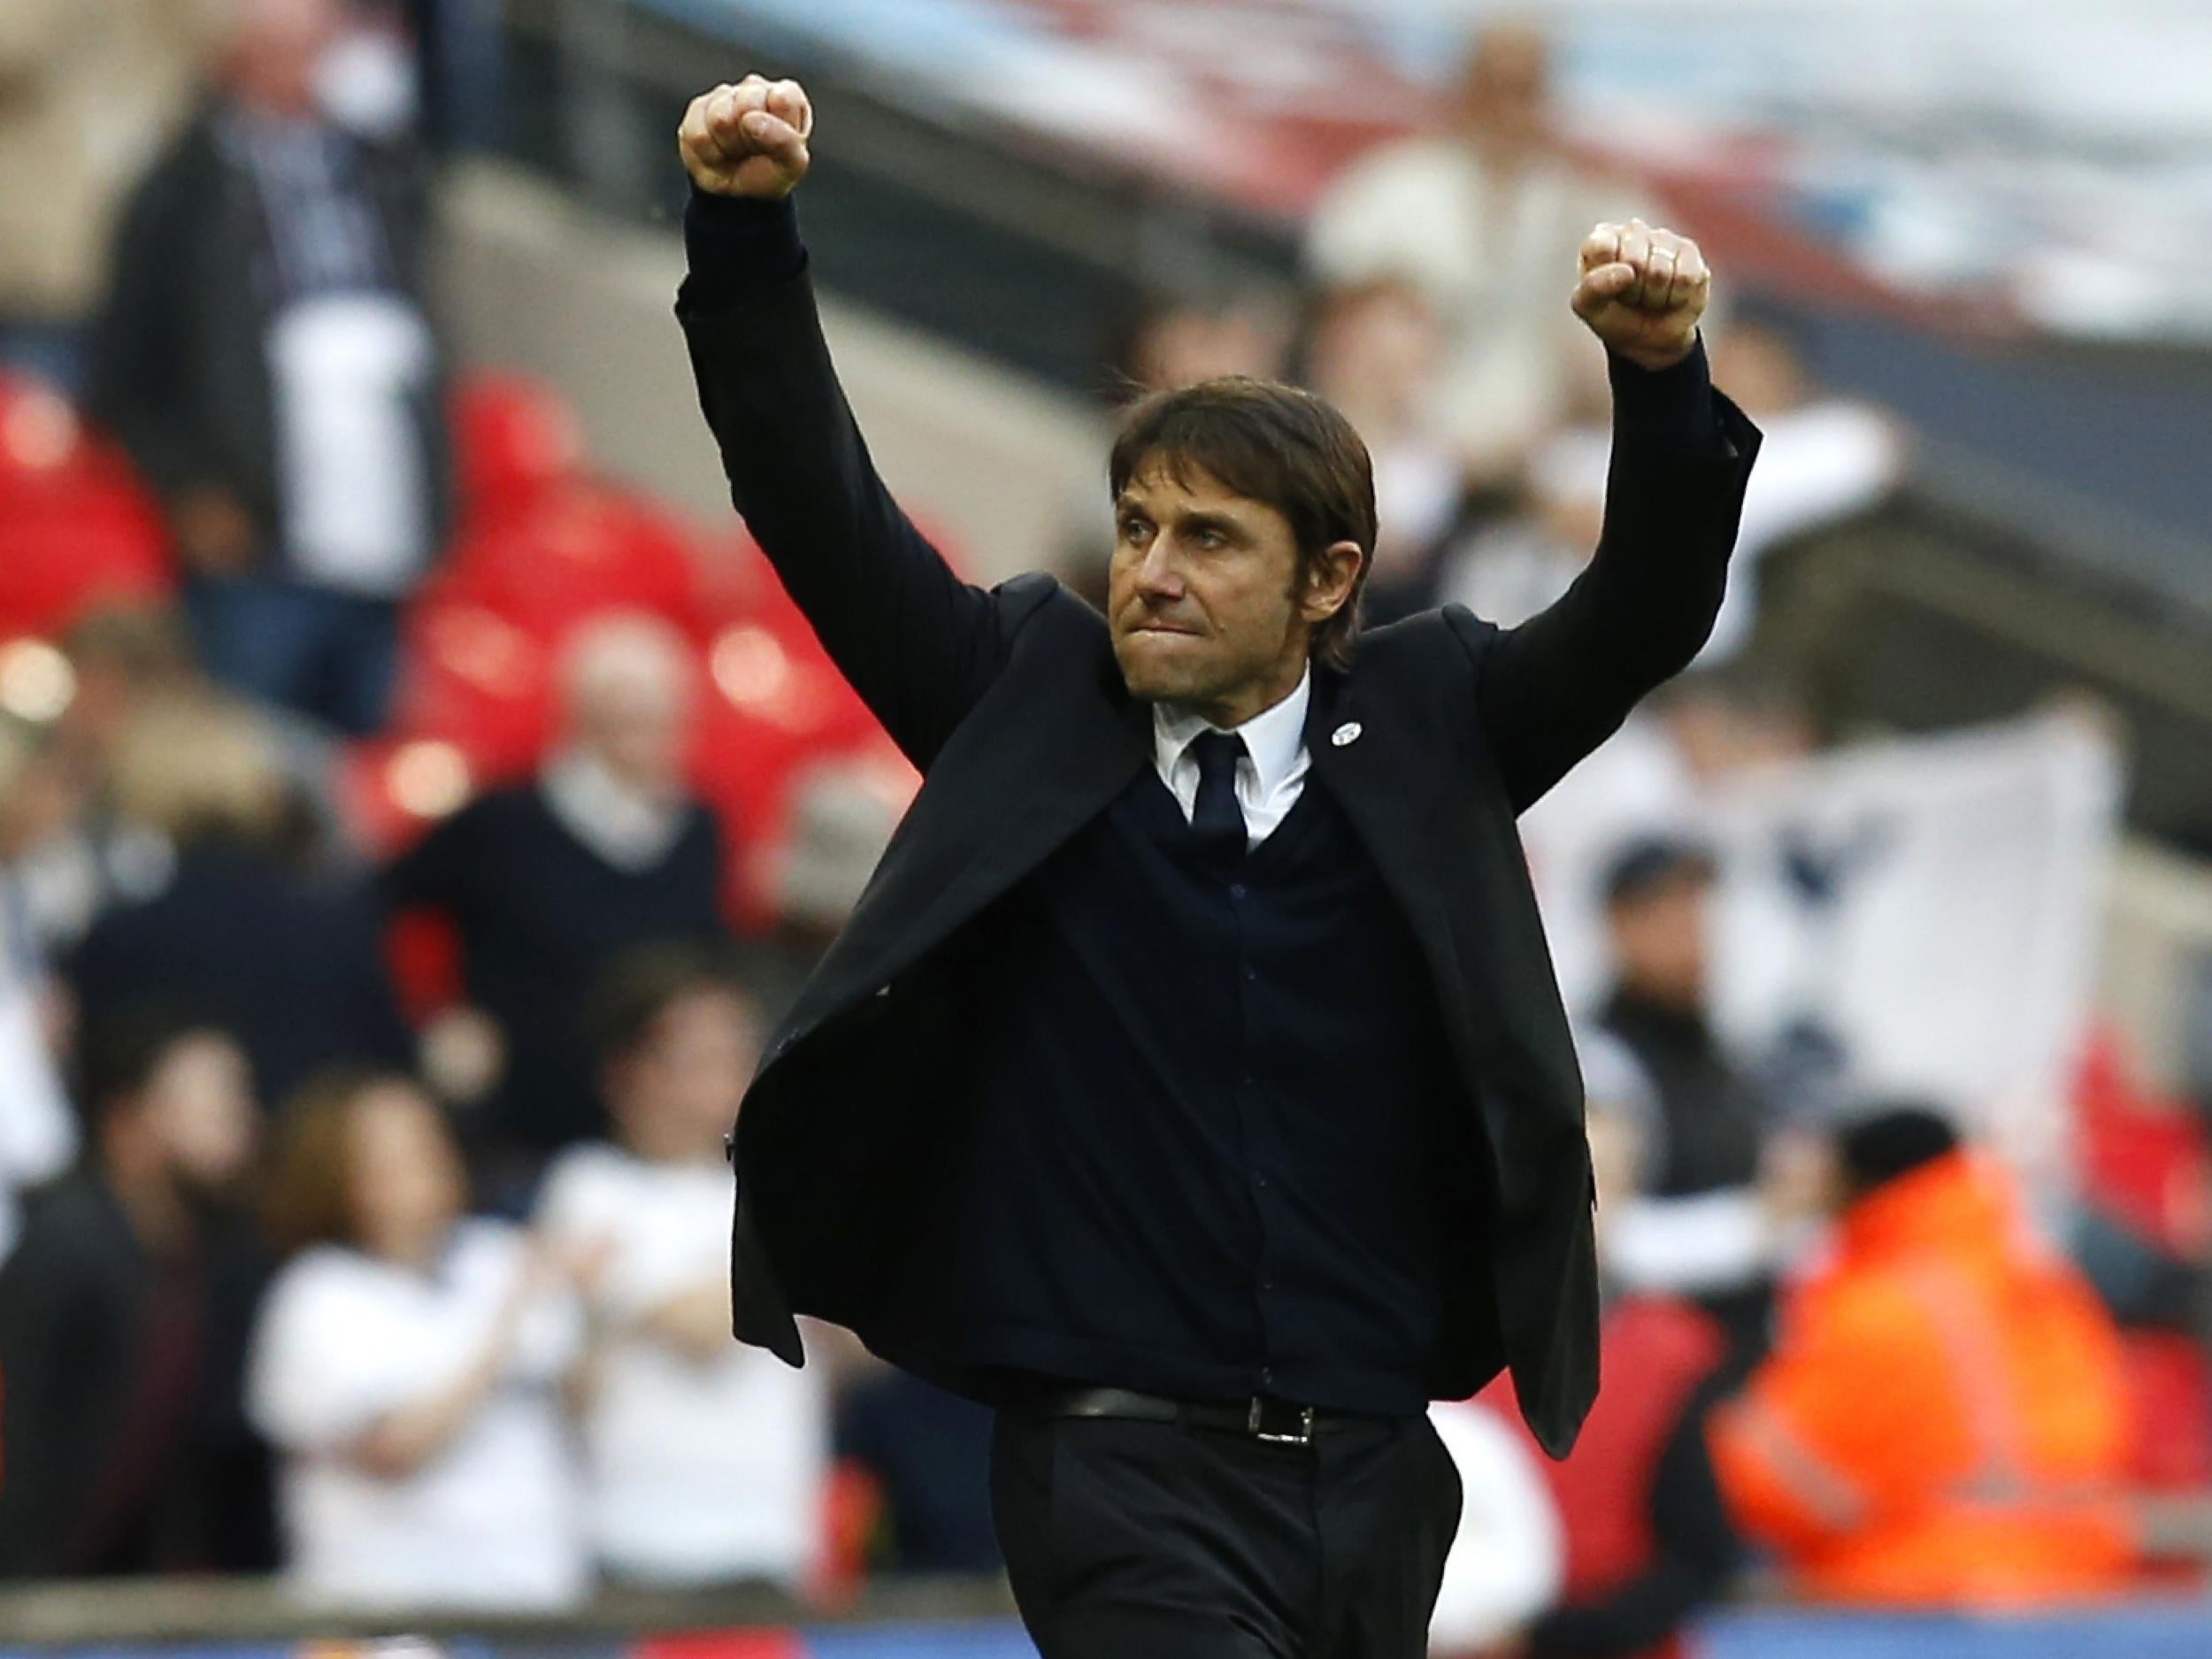 Conte likened this season to his first in charge of Juventus